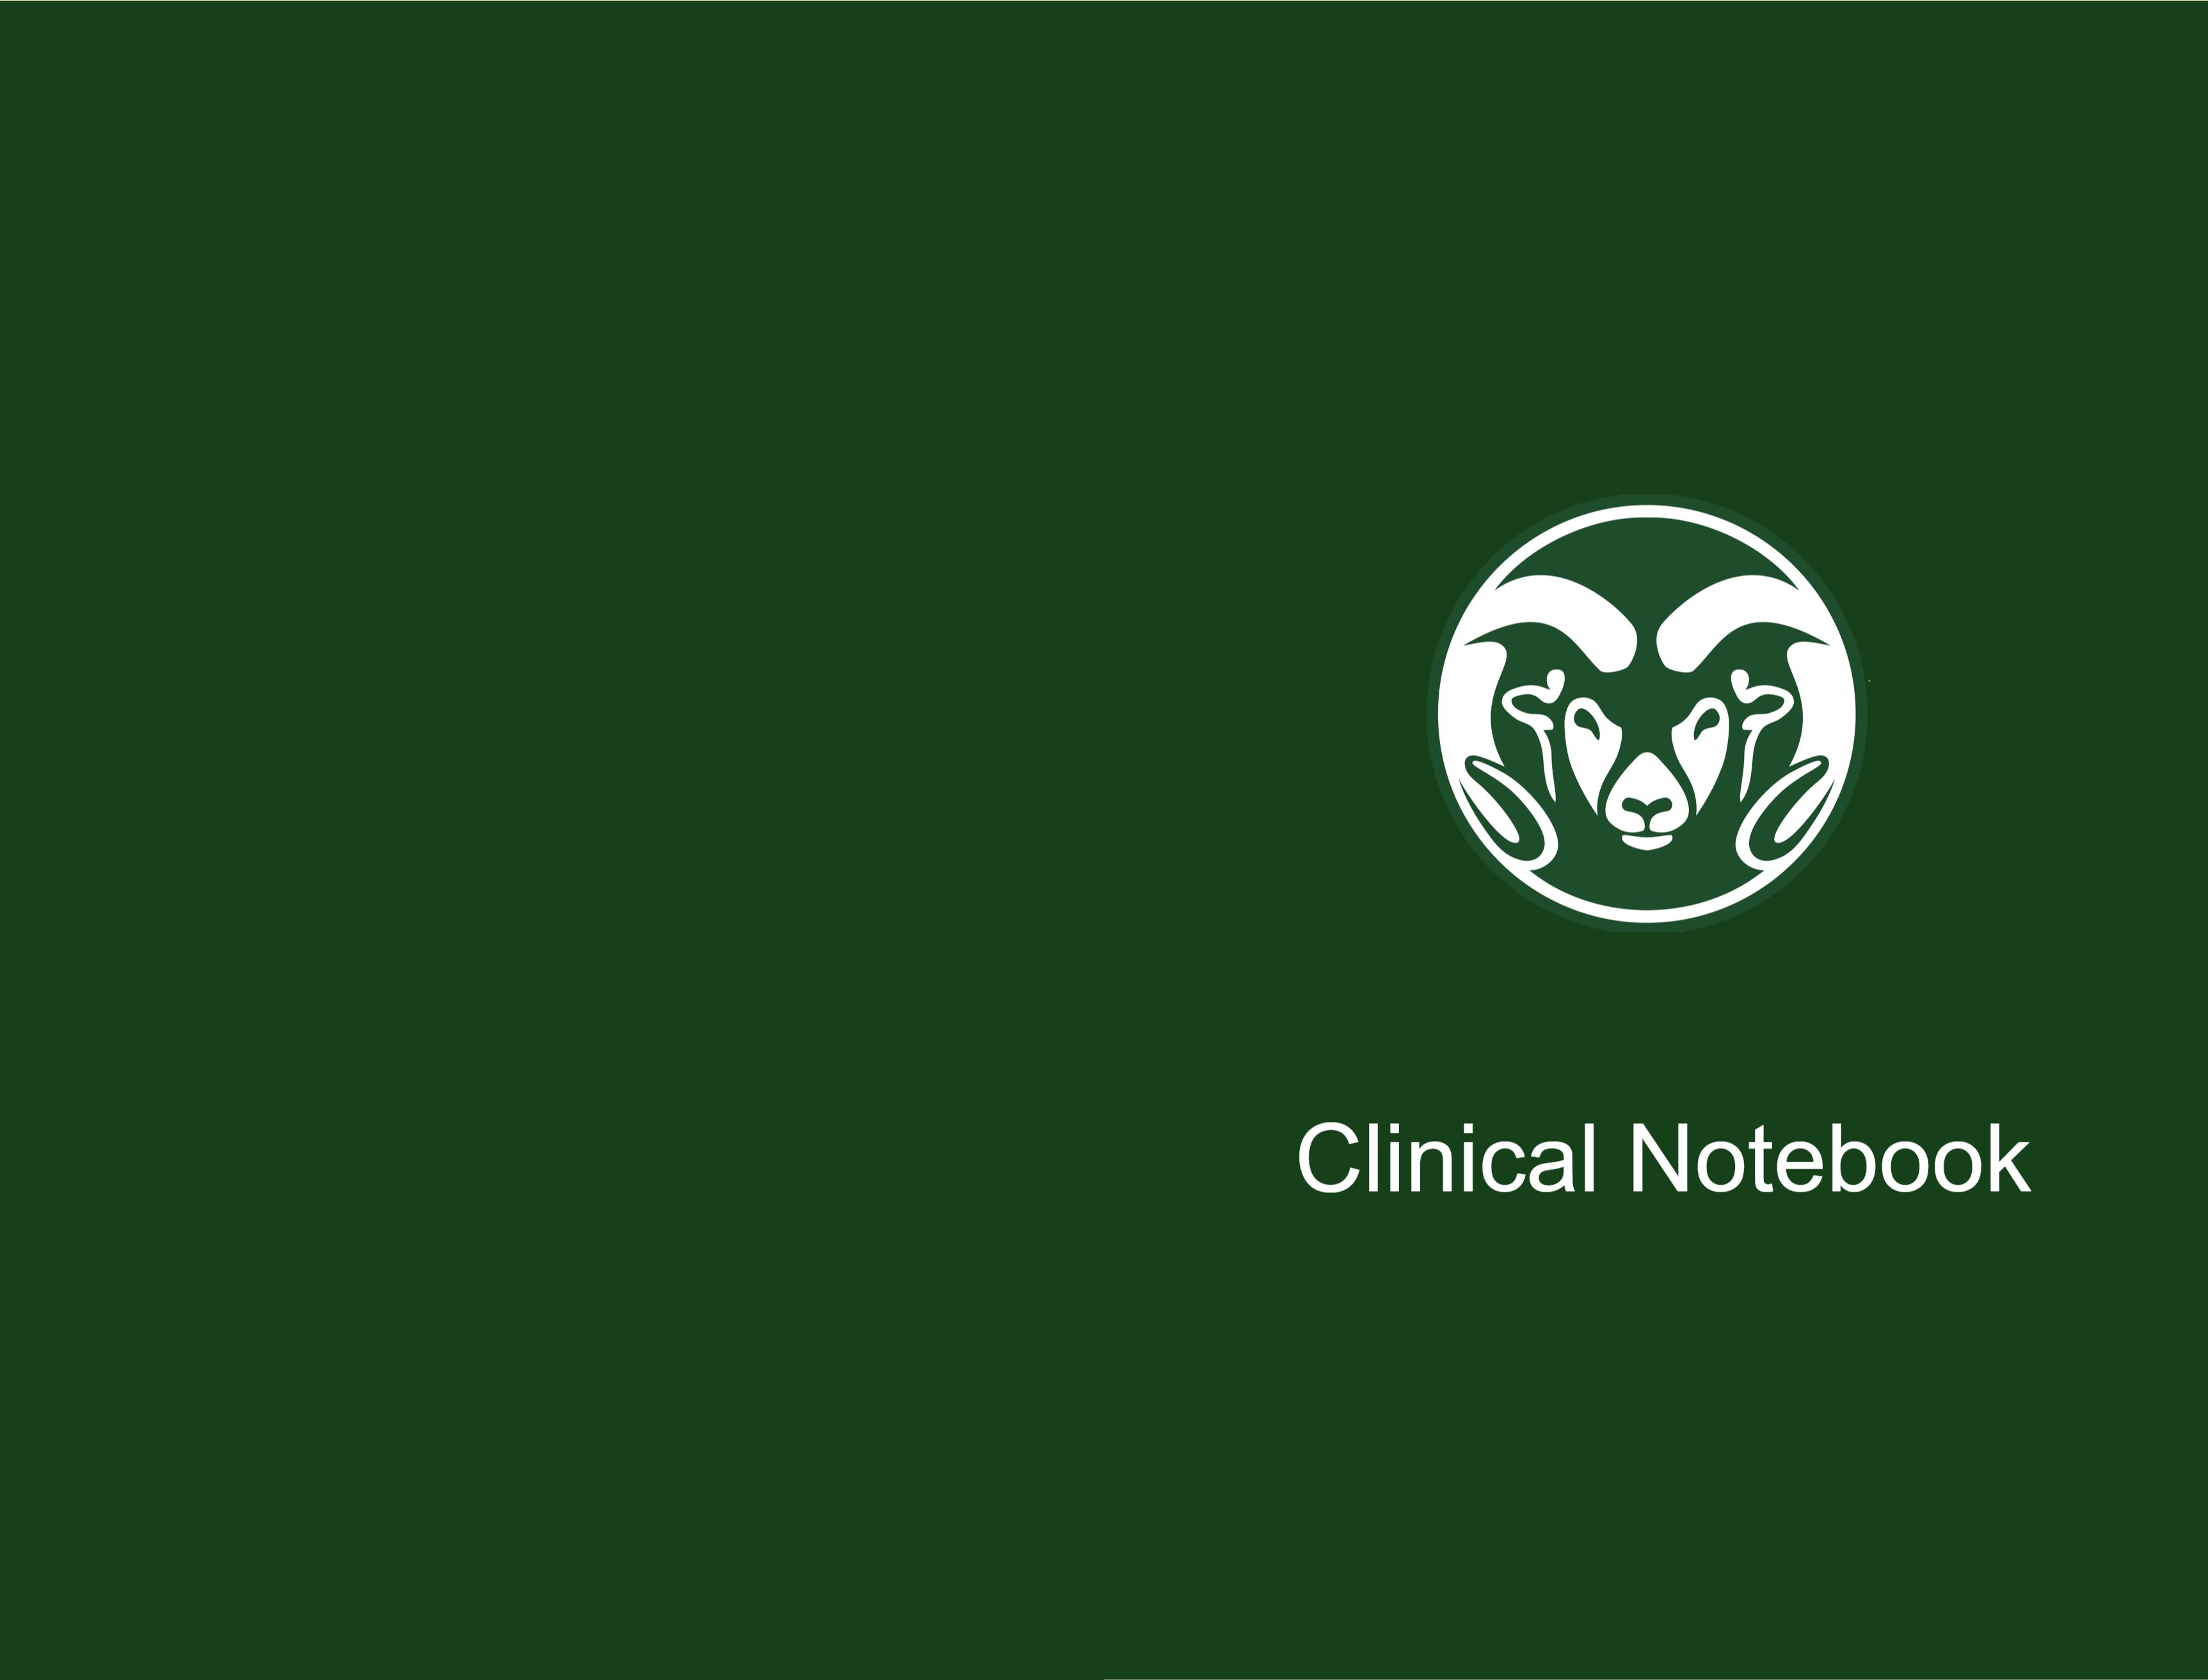 Clinical Notebook cover image